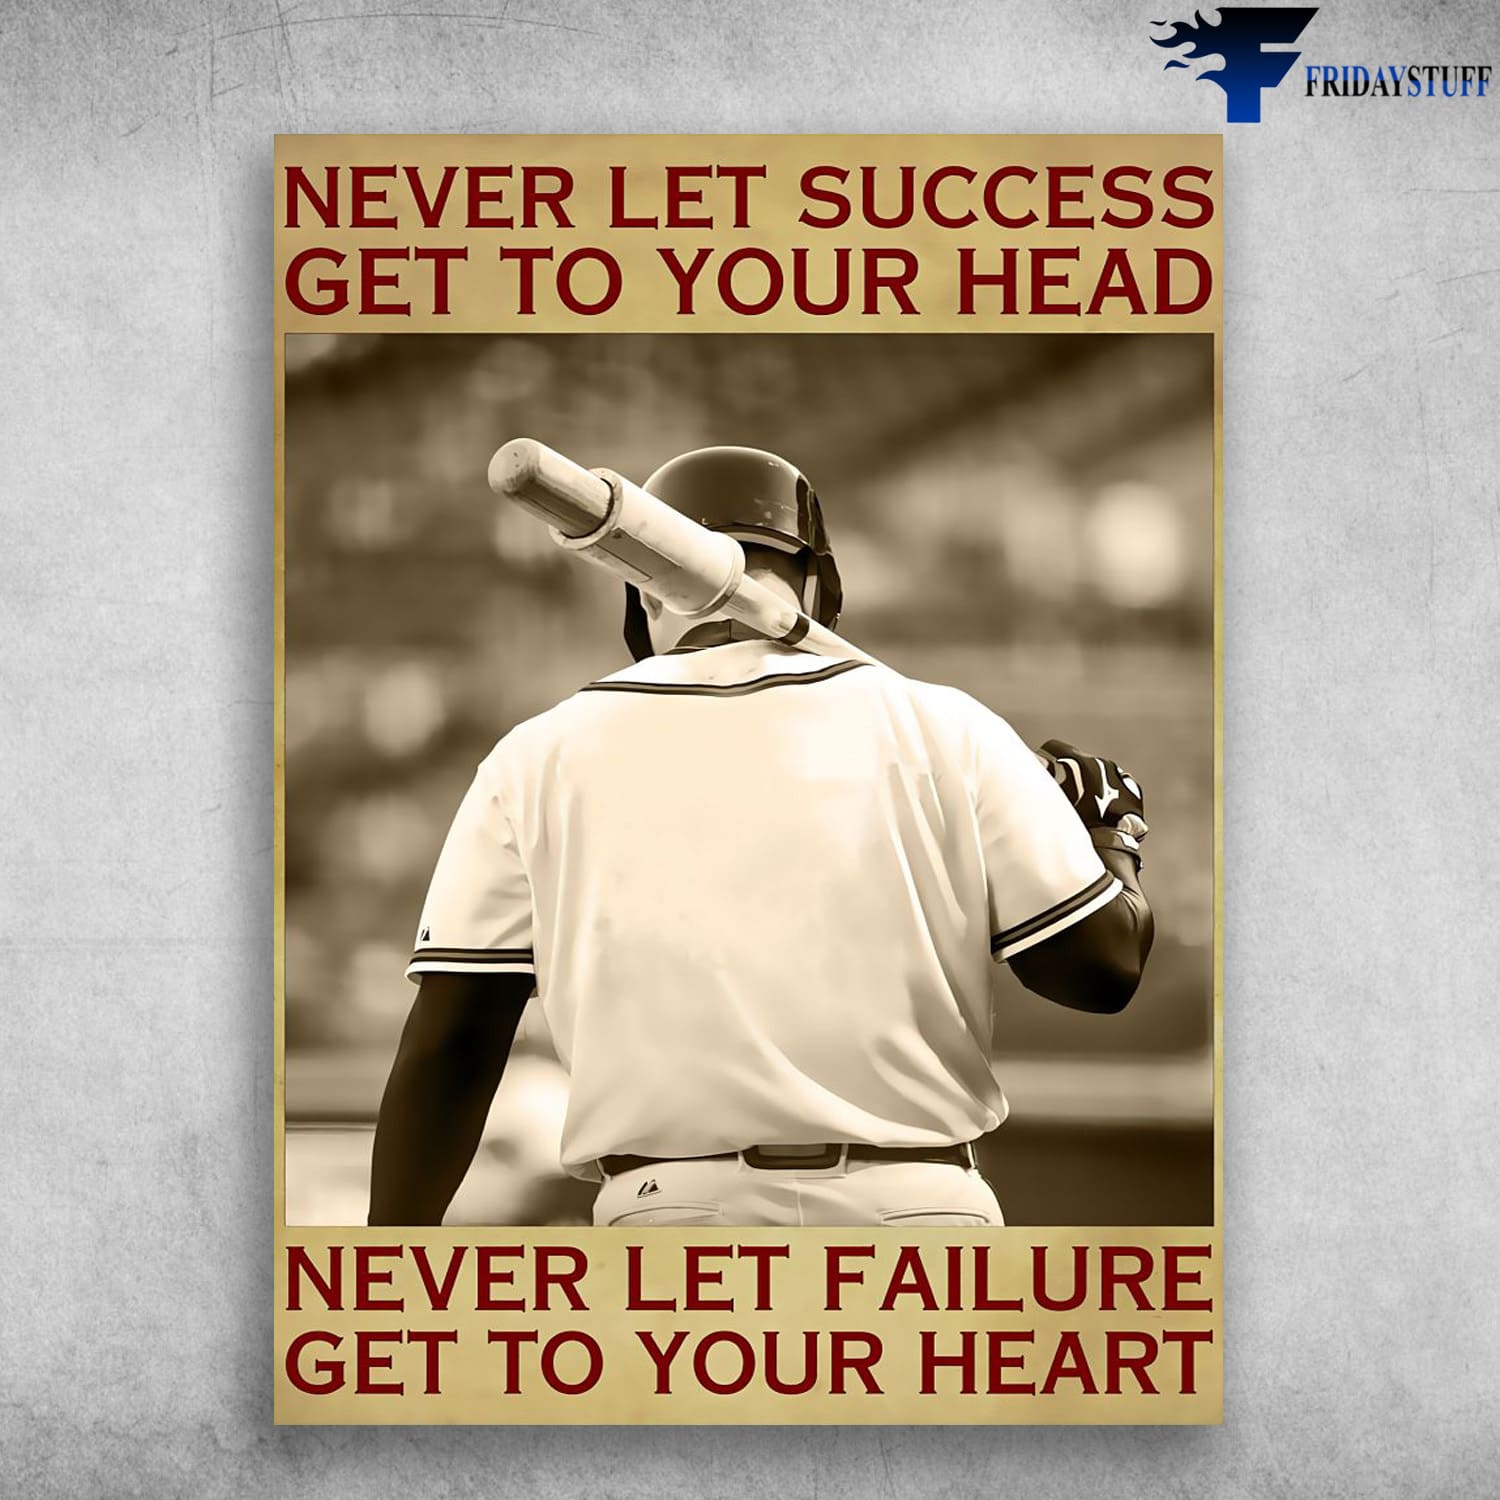 Baseball Player, Baseball Lover, Never Let Success, Get To Your Head, Never Let Failure, Get To Your Heart